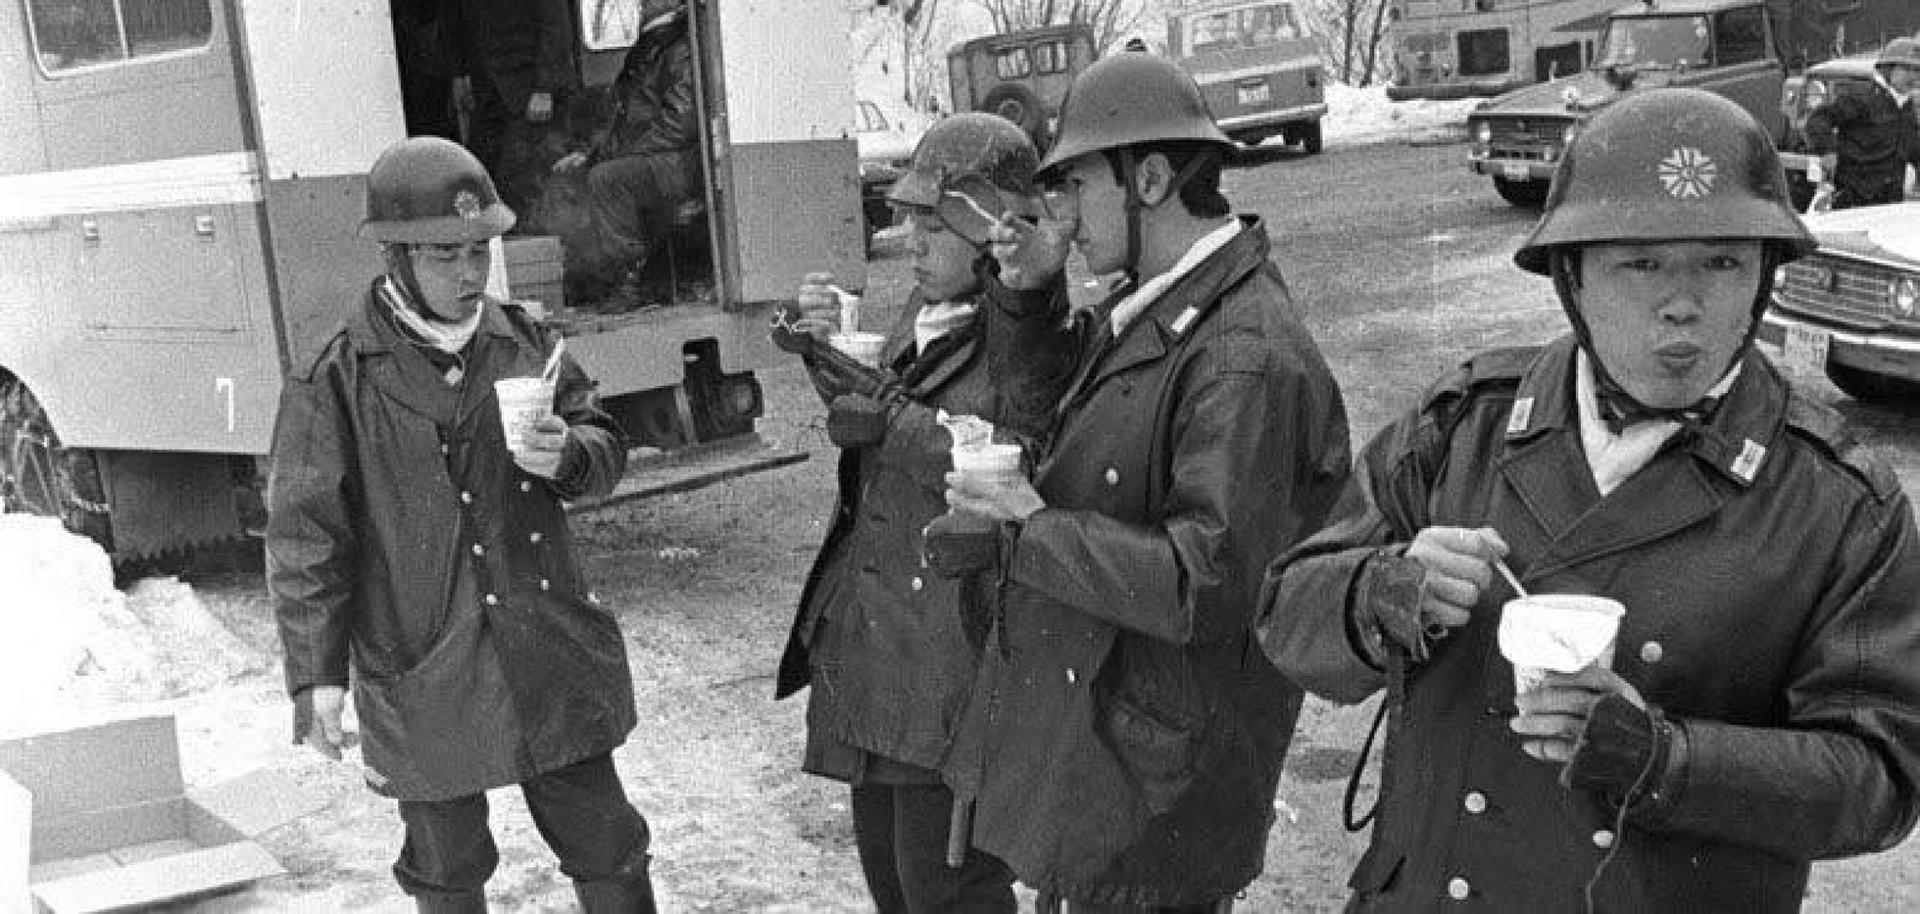 Black and white photo of Japanese policemen in coats and helmets eating Cup Noodles